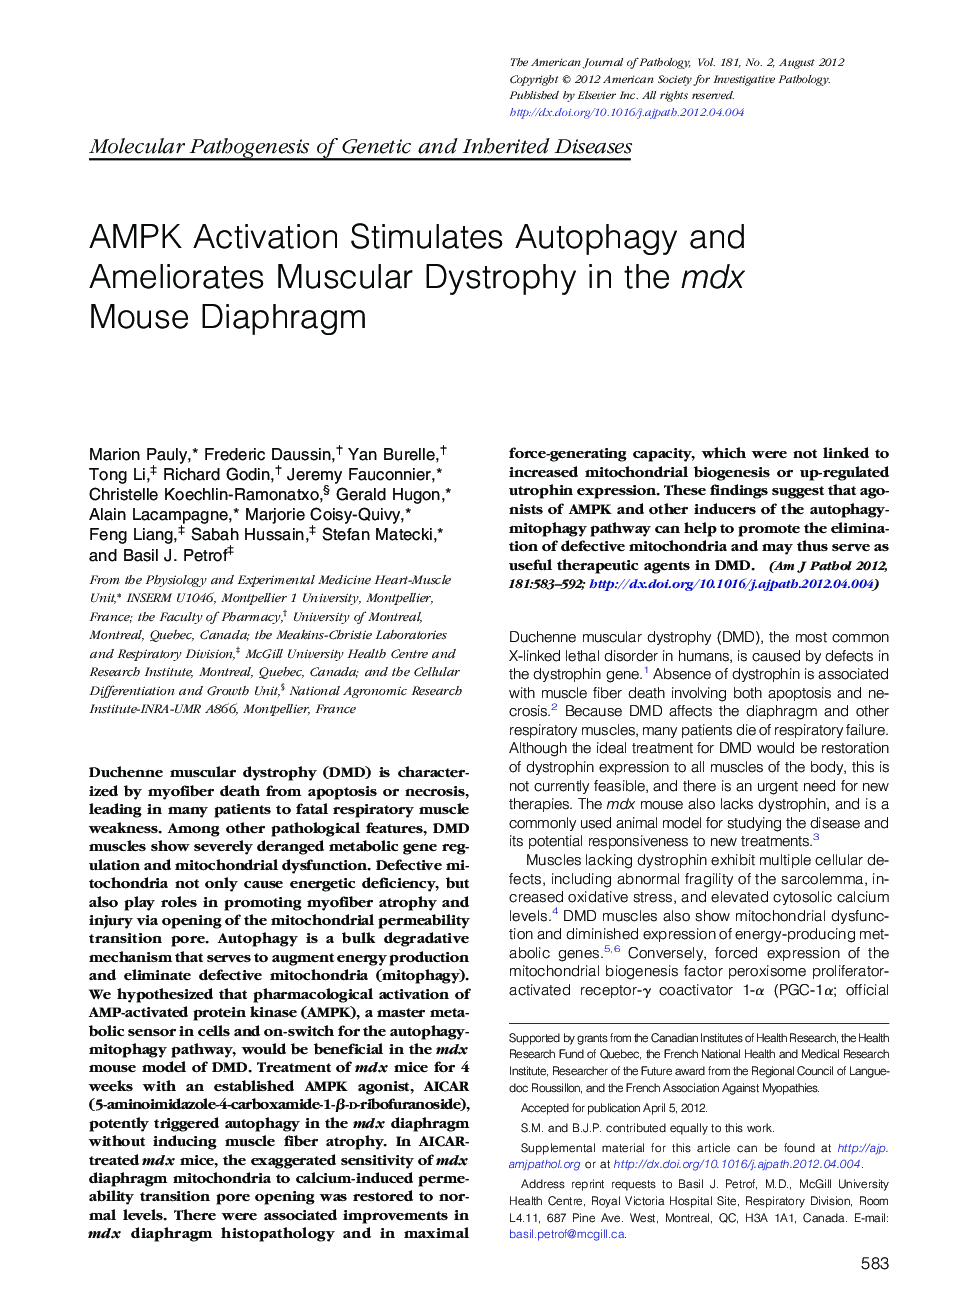 AMPK Activation Stimulates Autophagy and Ameliorates Muscular Dystrophy in the mdx Mouse Diaphragm